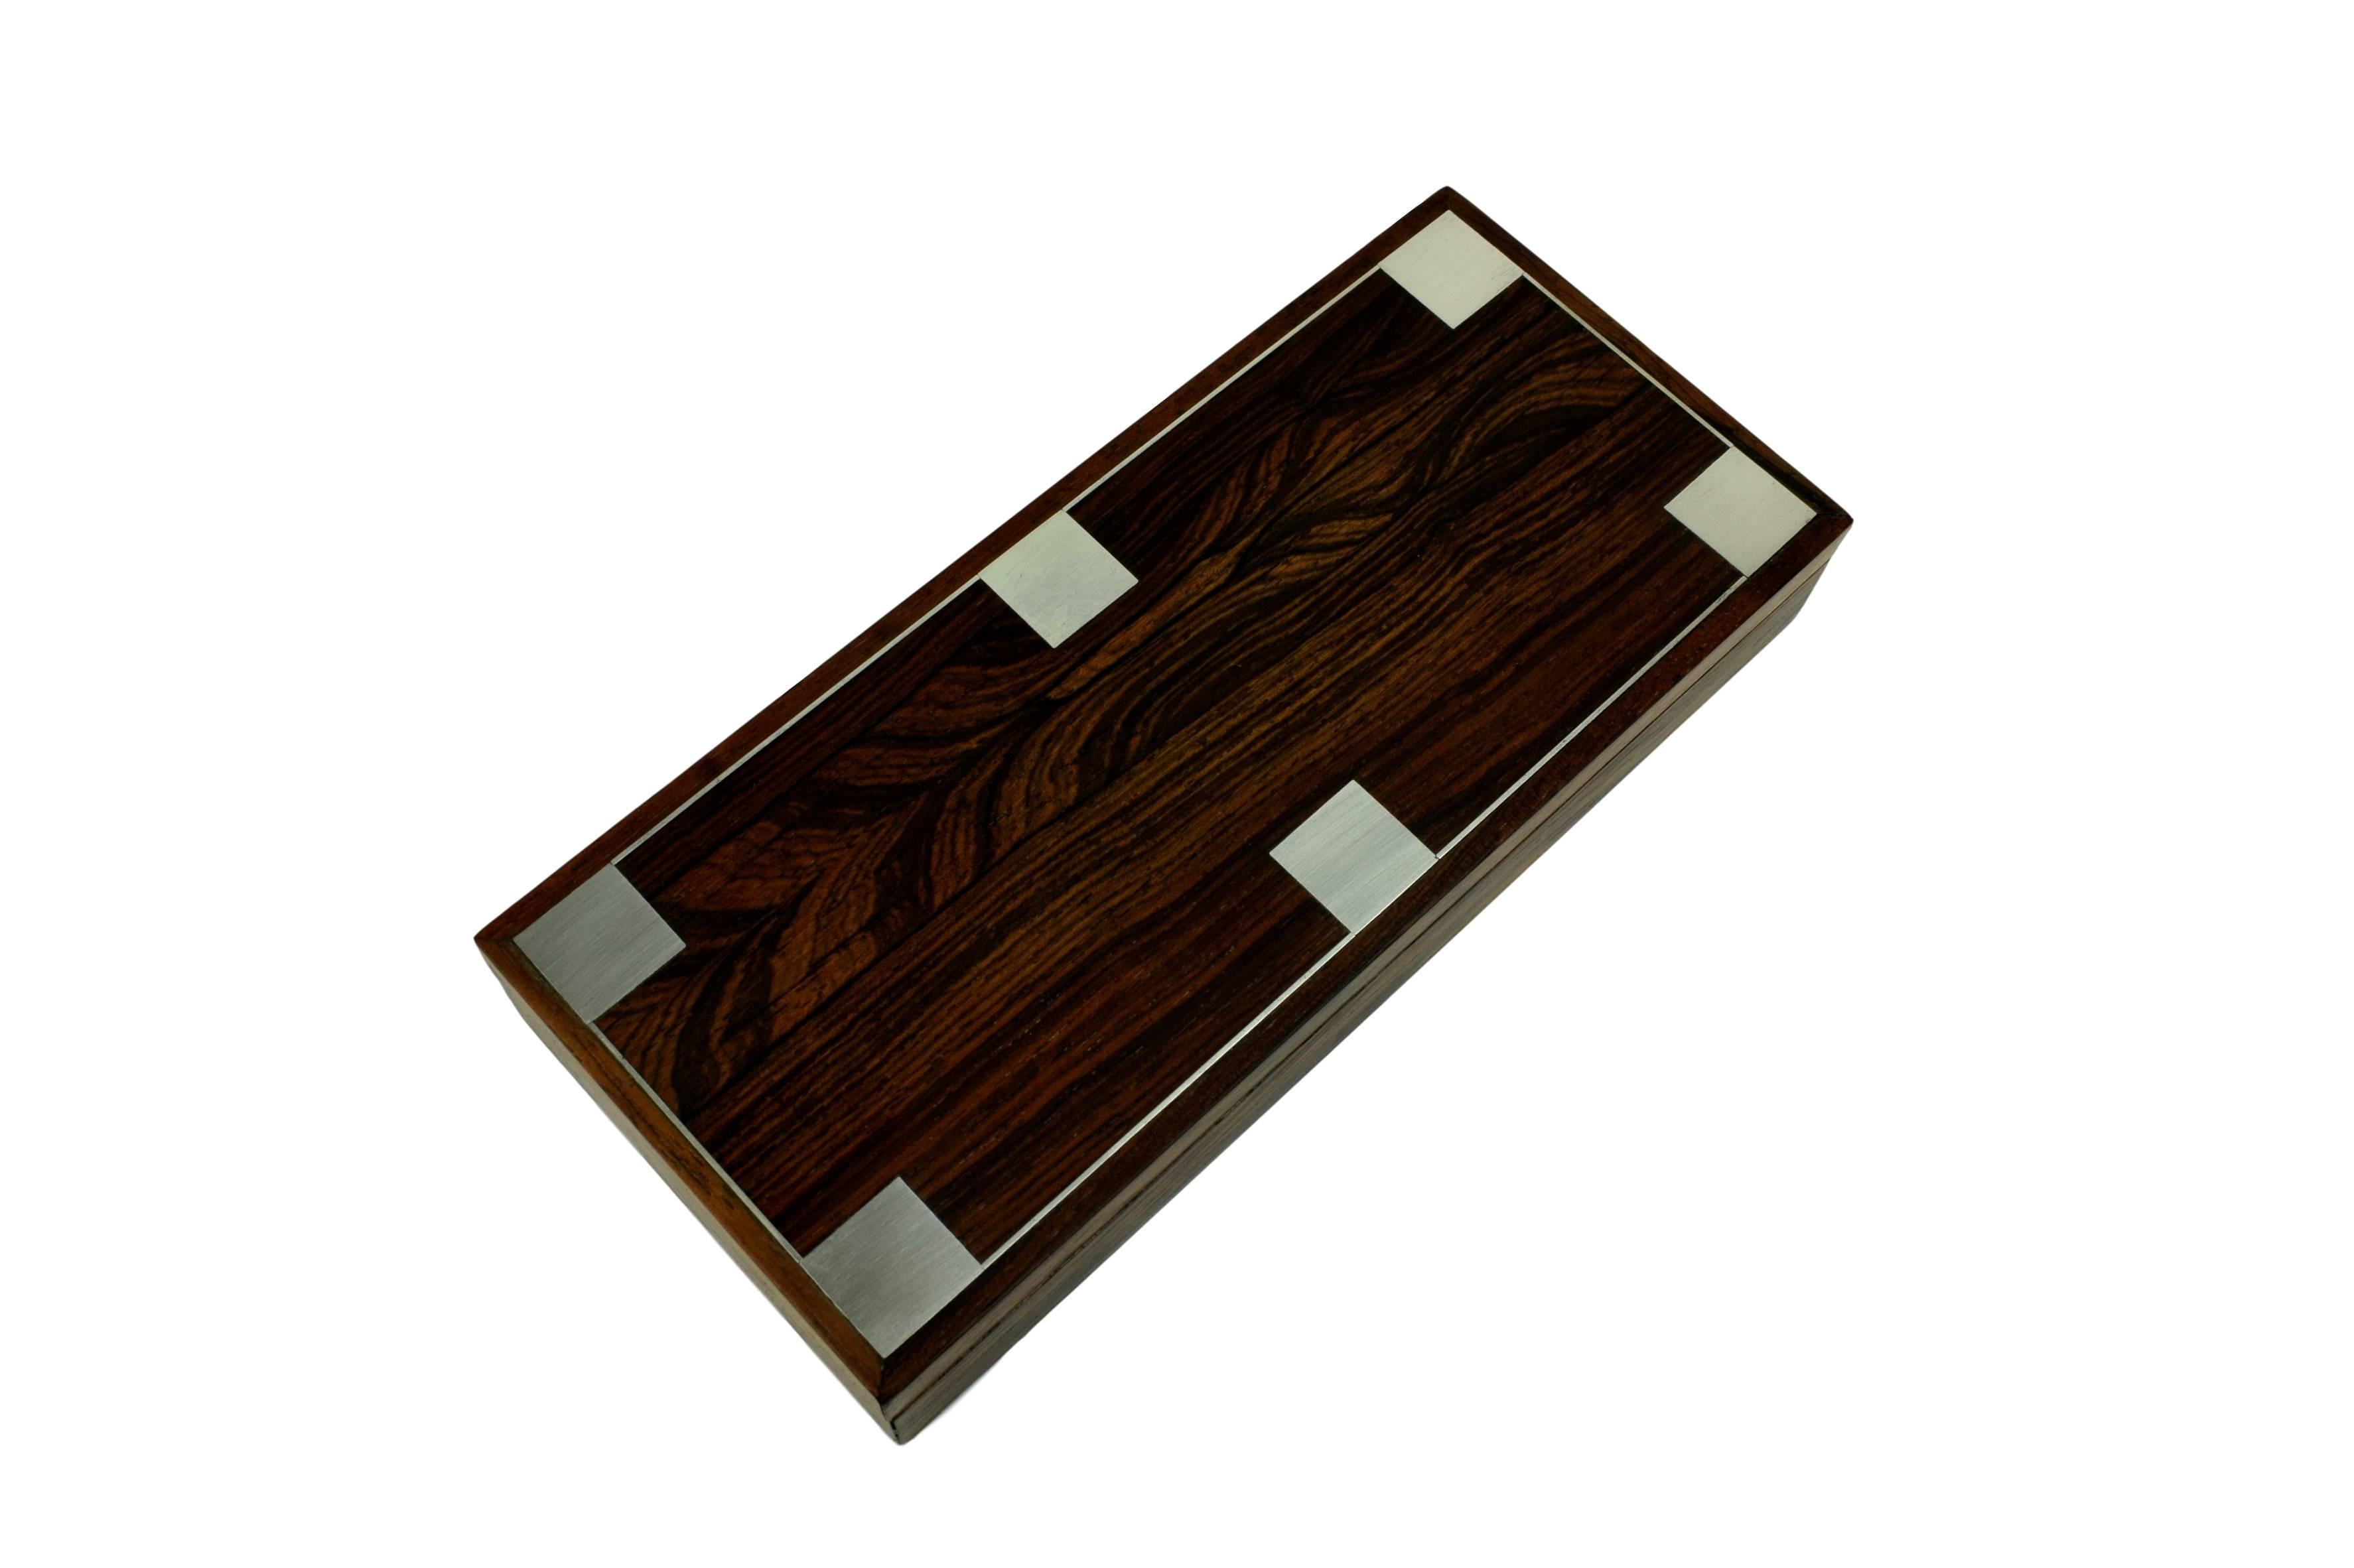 A Danish midcentury rosewood box with six square Sterling 925 silver inlays. Design by Danish silversmith Hans Hansen. Two adjustable compartments.

Hall mark on the bottom of the box with the text 